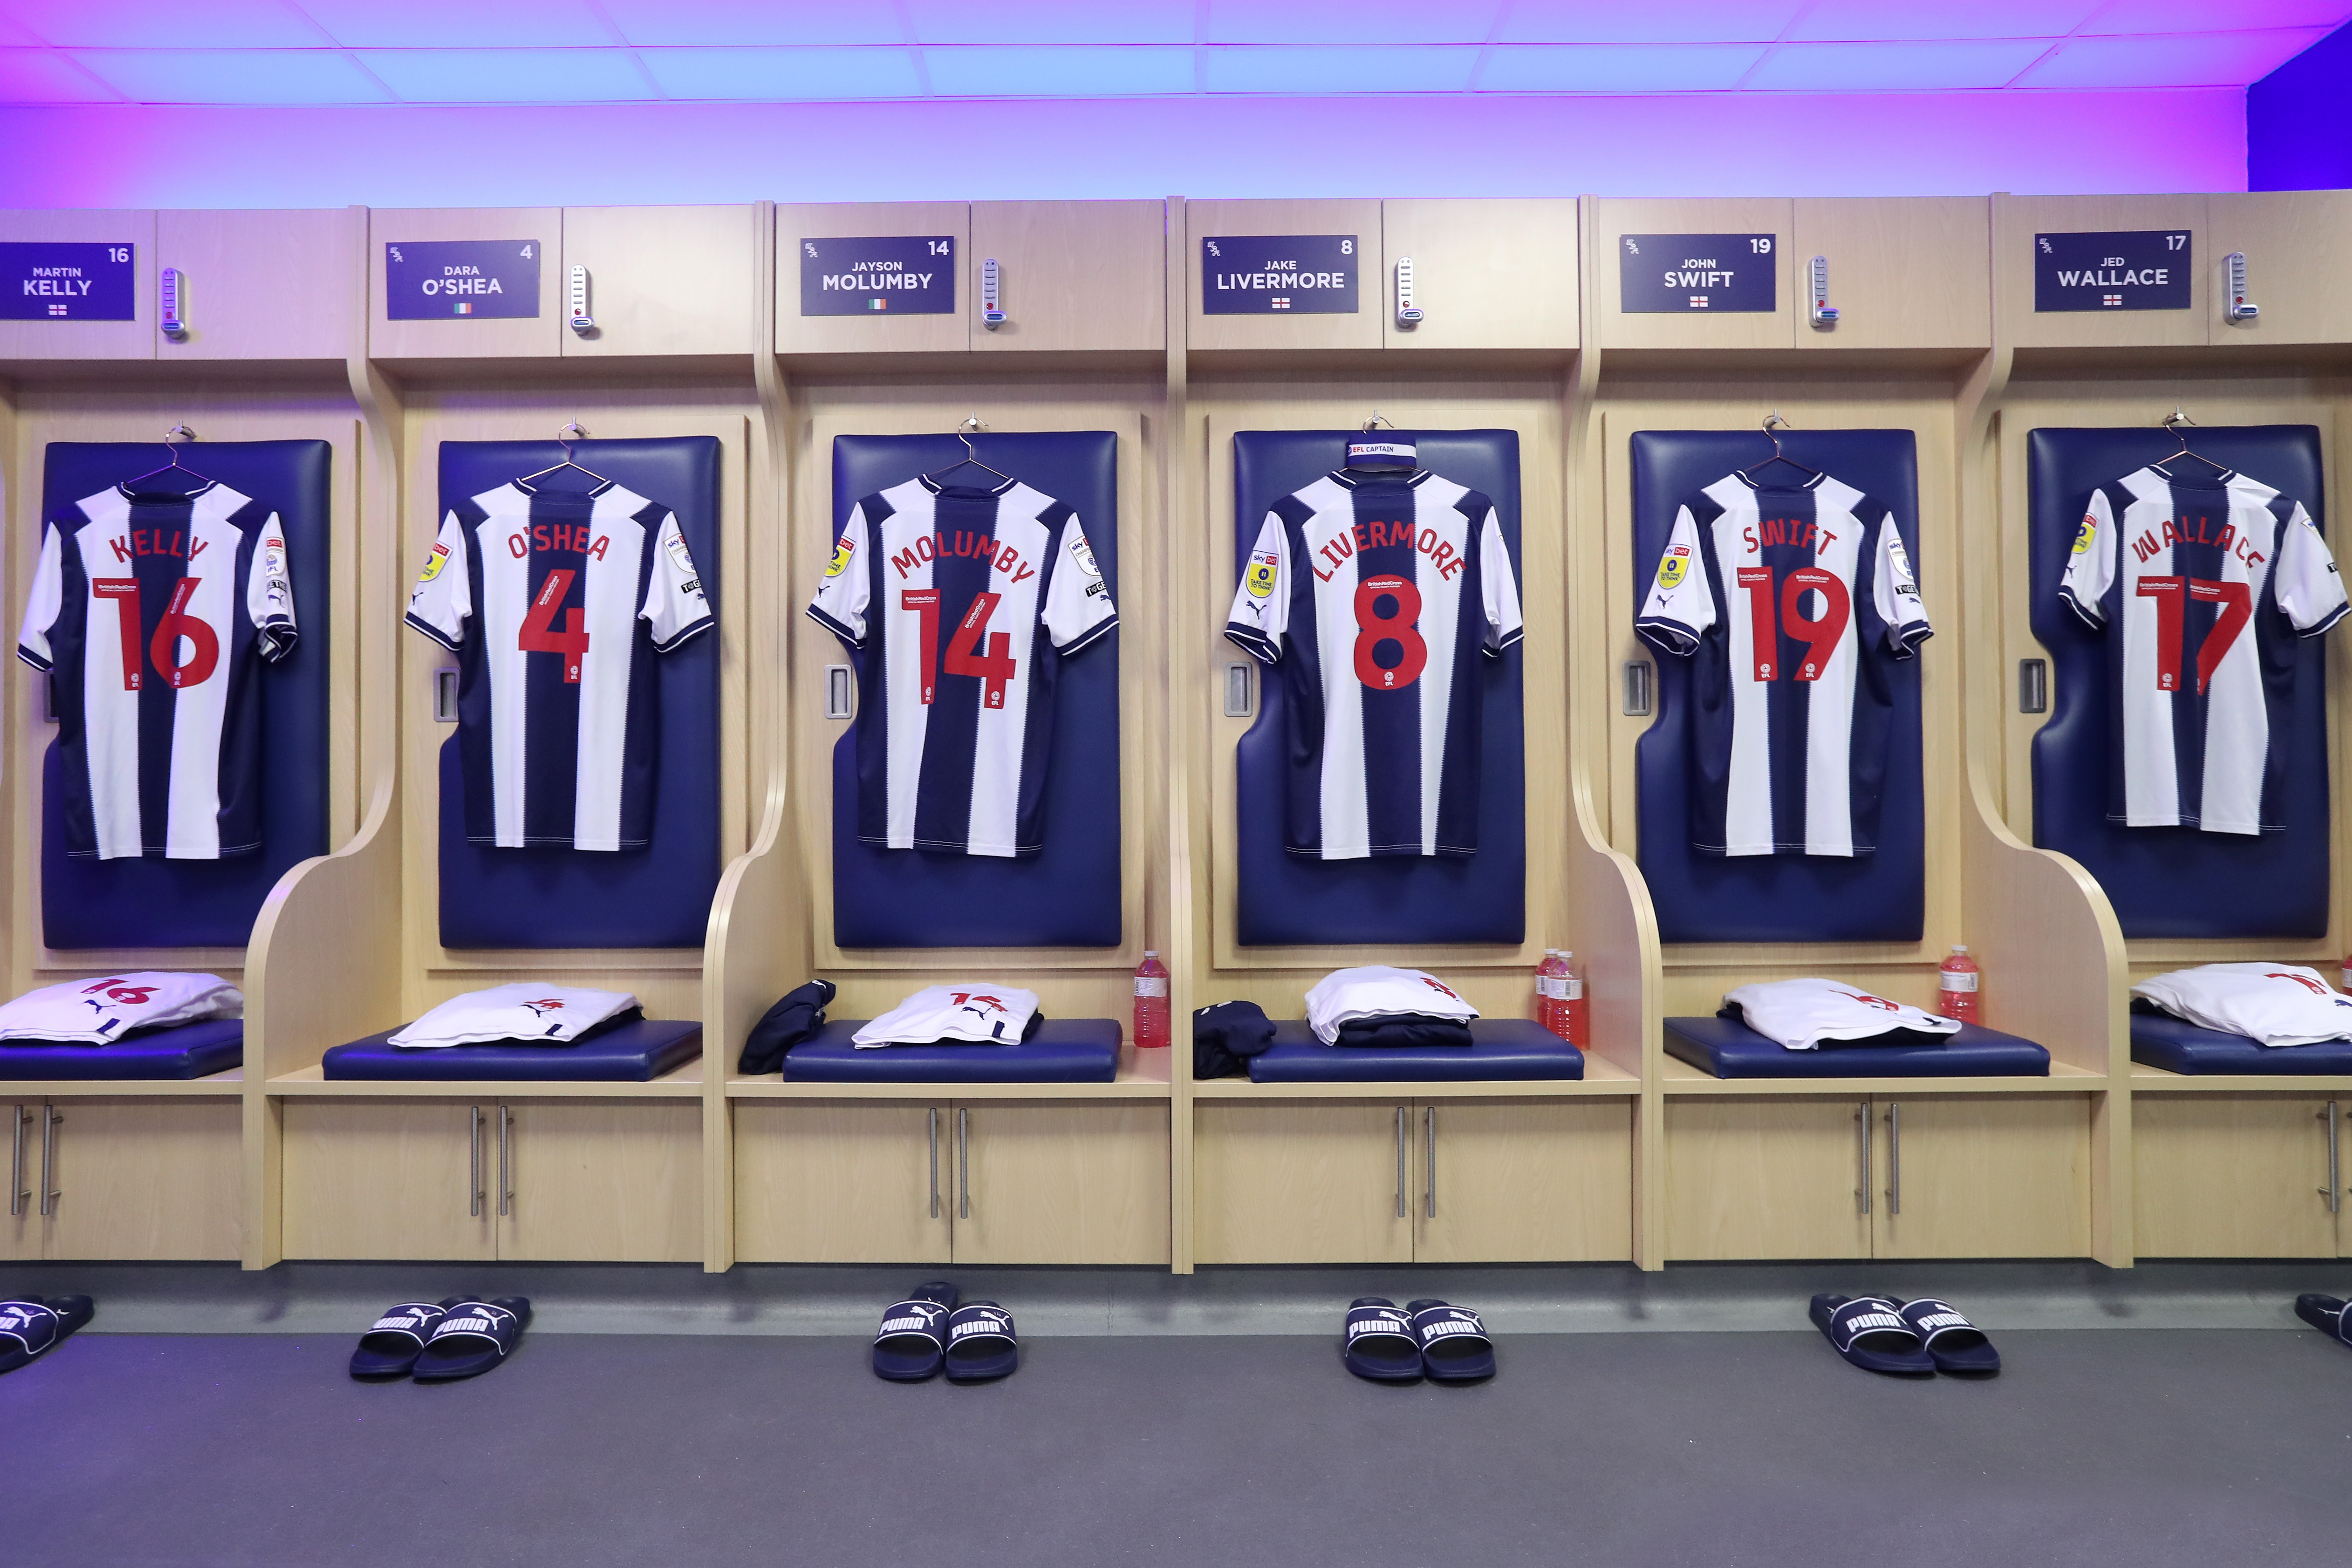 A shot of the dressing room at The Hawthorns.